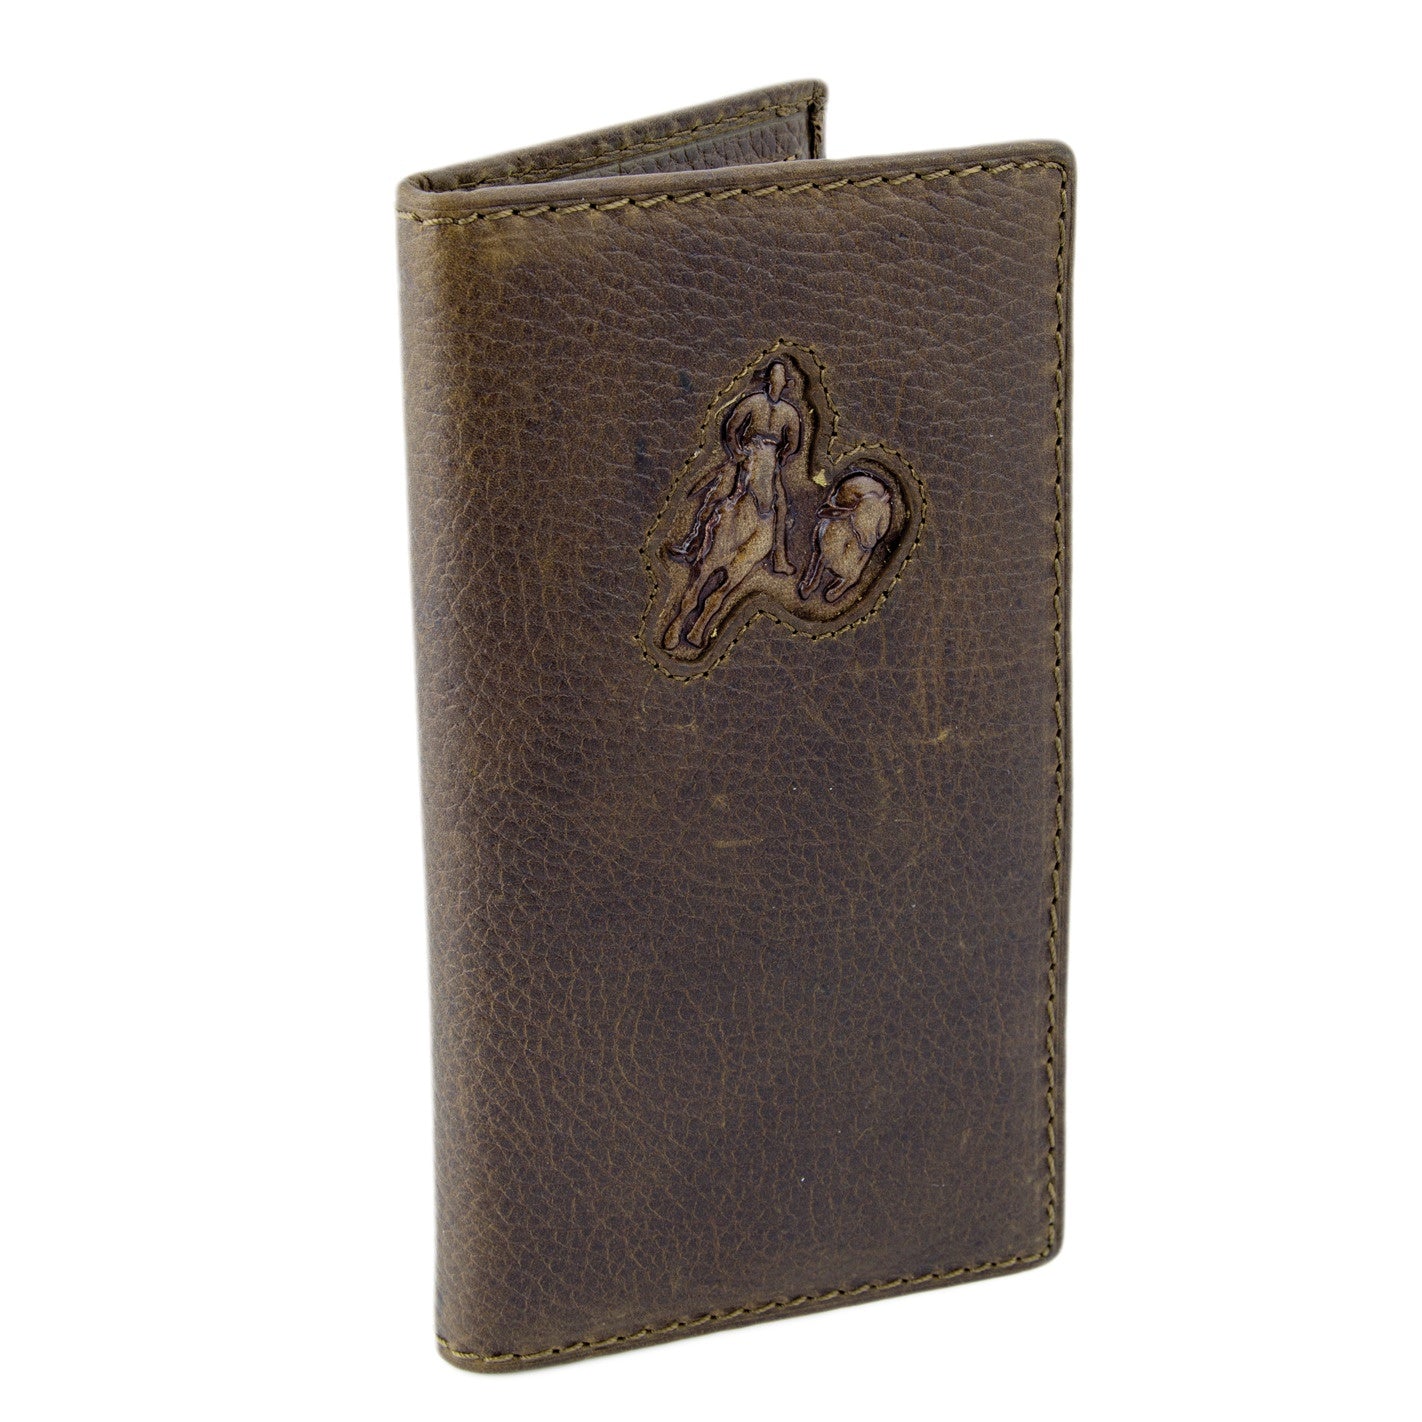 Rodeo Wallet - Leather - Distressed - Campdrafter (4896525877325)